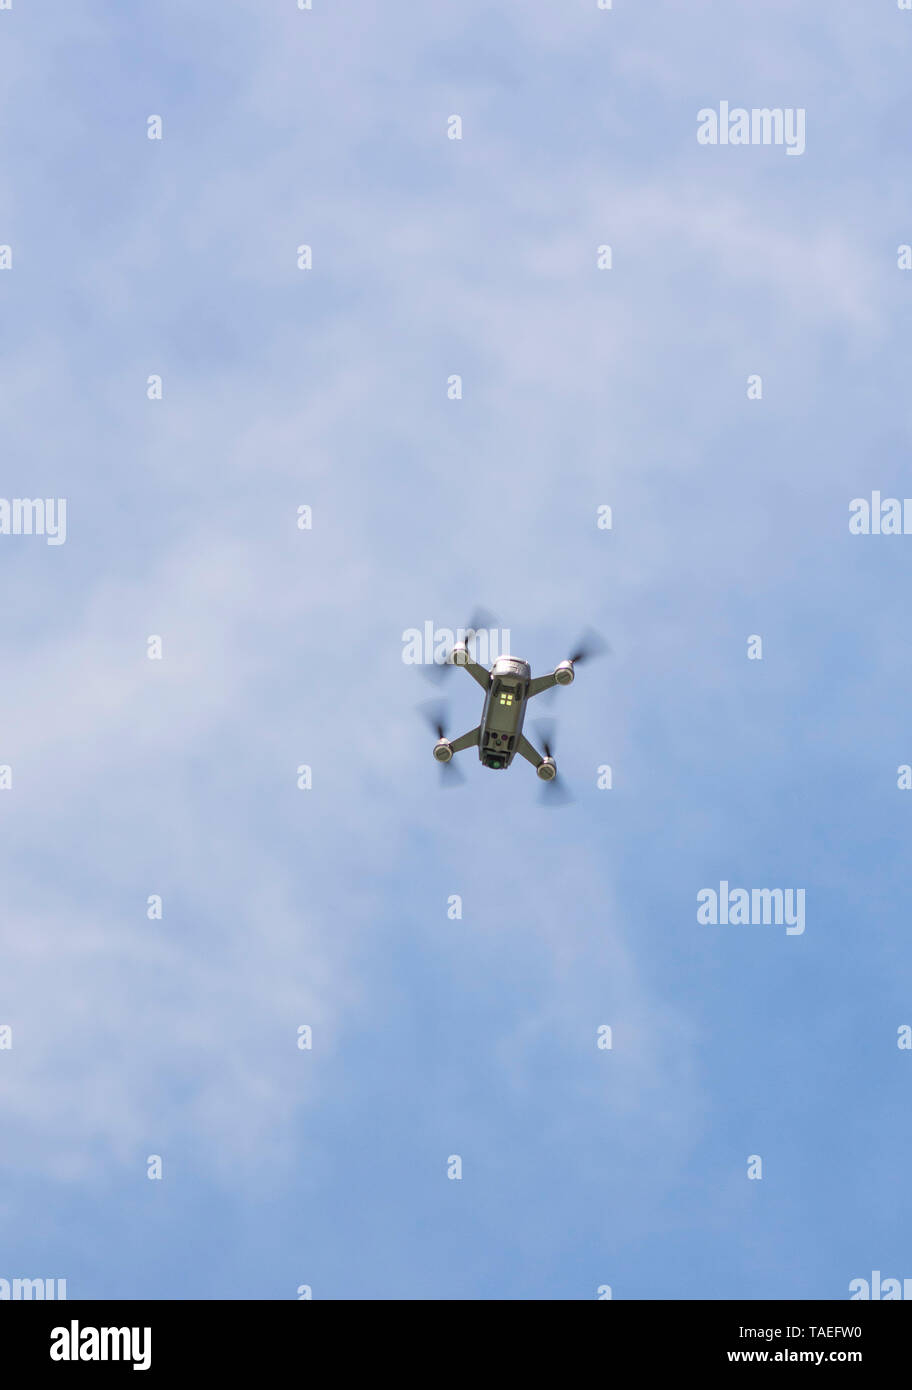 Drone copter, DJI Spark, flying with high resolution digital camera, hovering high in sky. Stock Photo